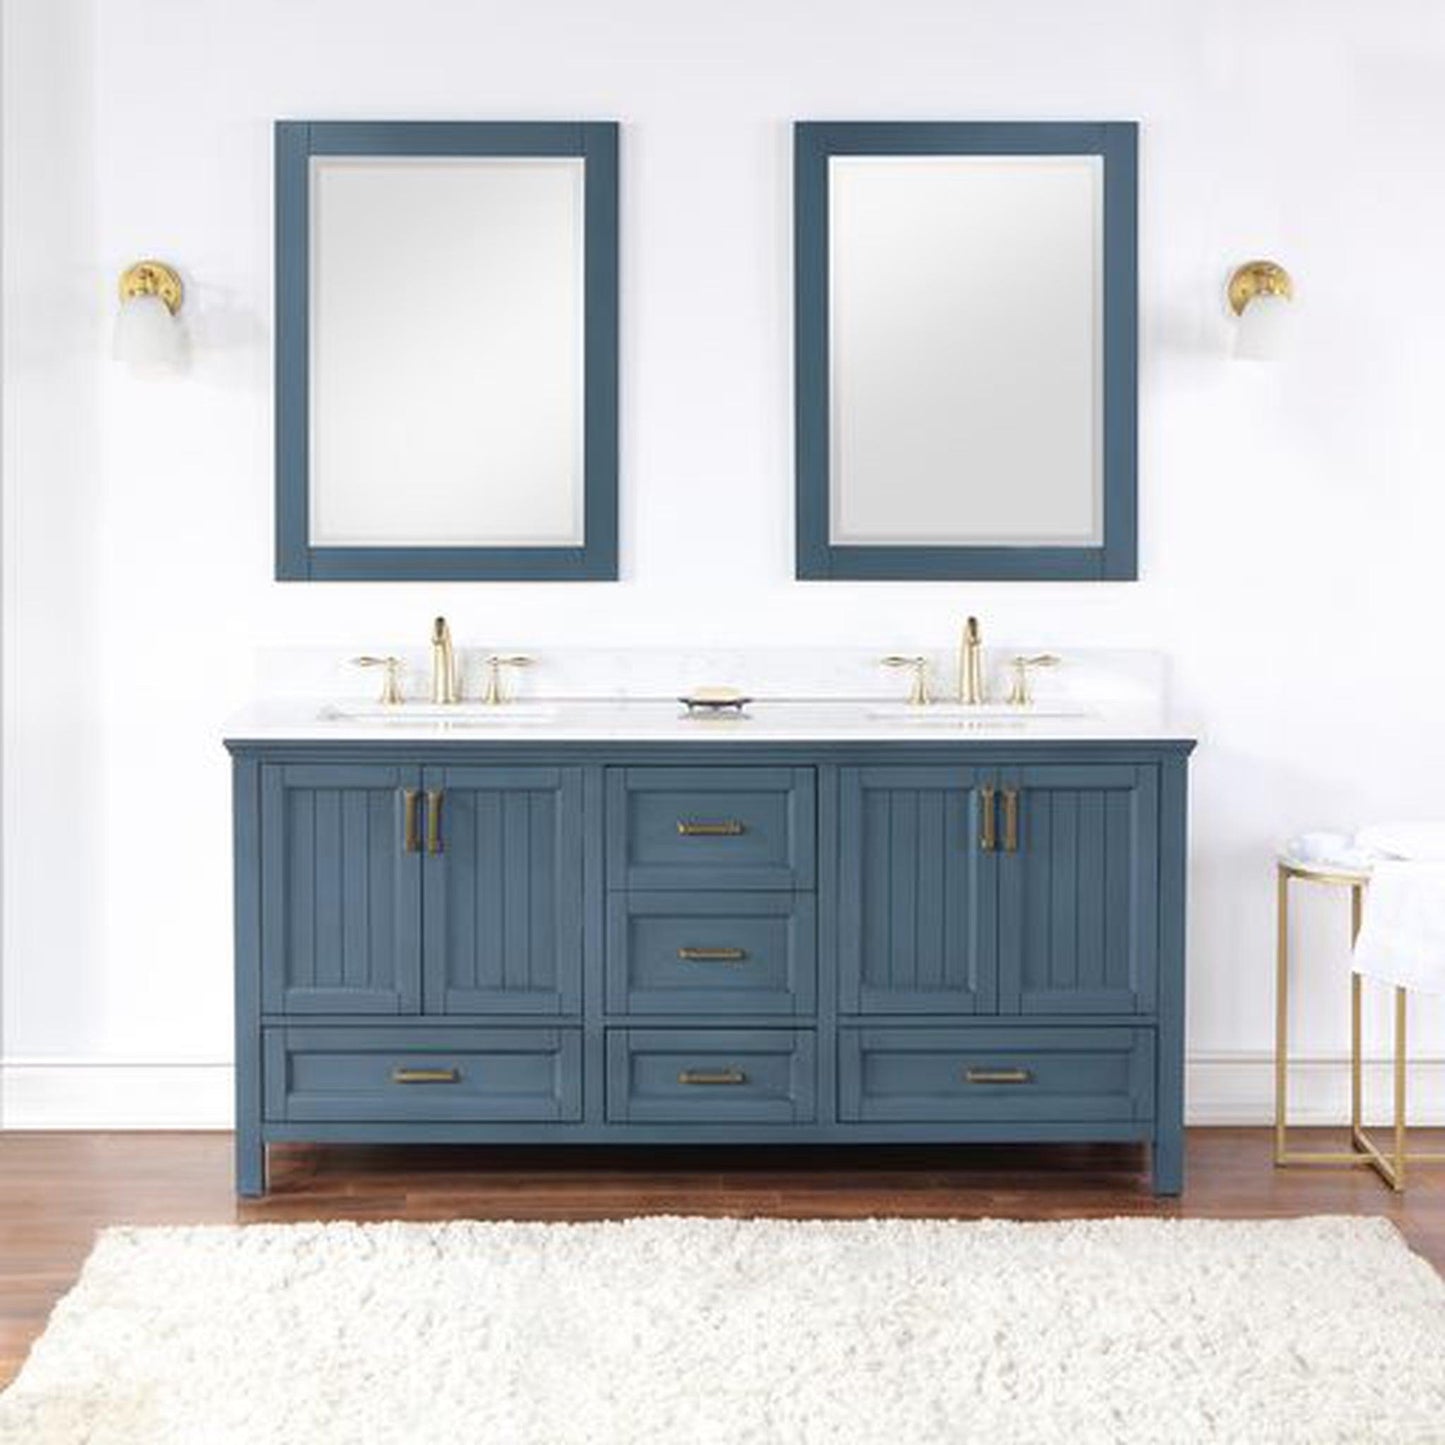 Altair Isla 72" Double Classic Blue Freestanding Bathroom Vanity Set With Mirror, Aosta White Composite Stone Top, Two Rectangular Undermount Ceramic Sinks, and Overflow